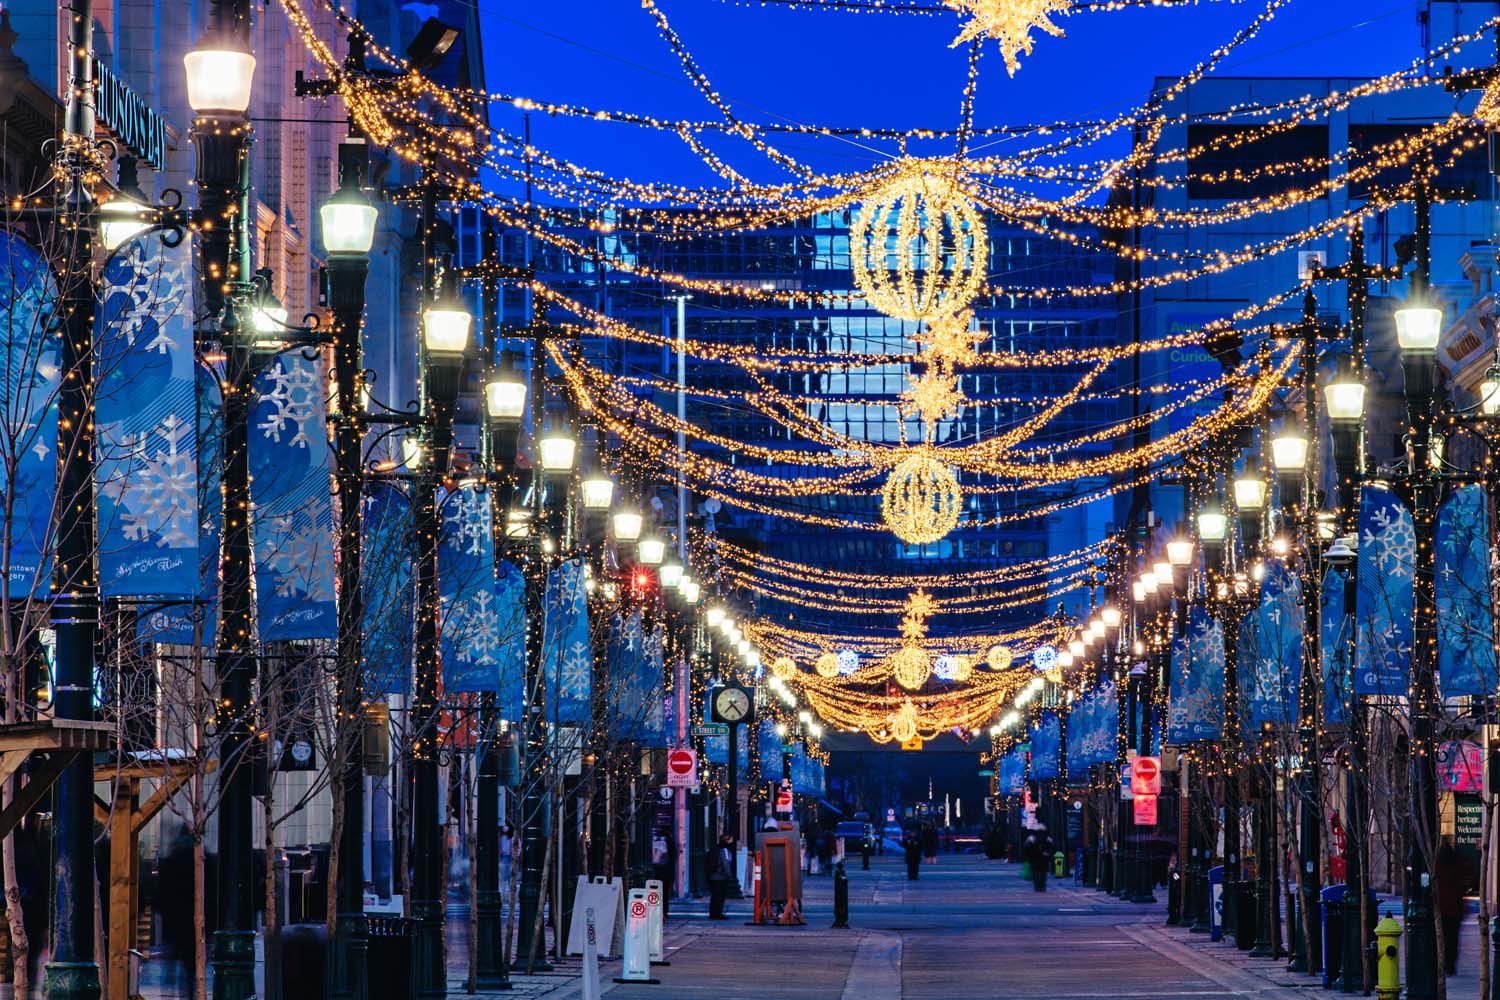 An urban street adorned with festive lights and decorations in the twilight. Illuminated street lamps and ornate light fixtures create a holiday atmosphere.